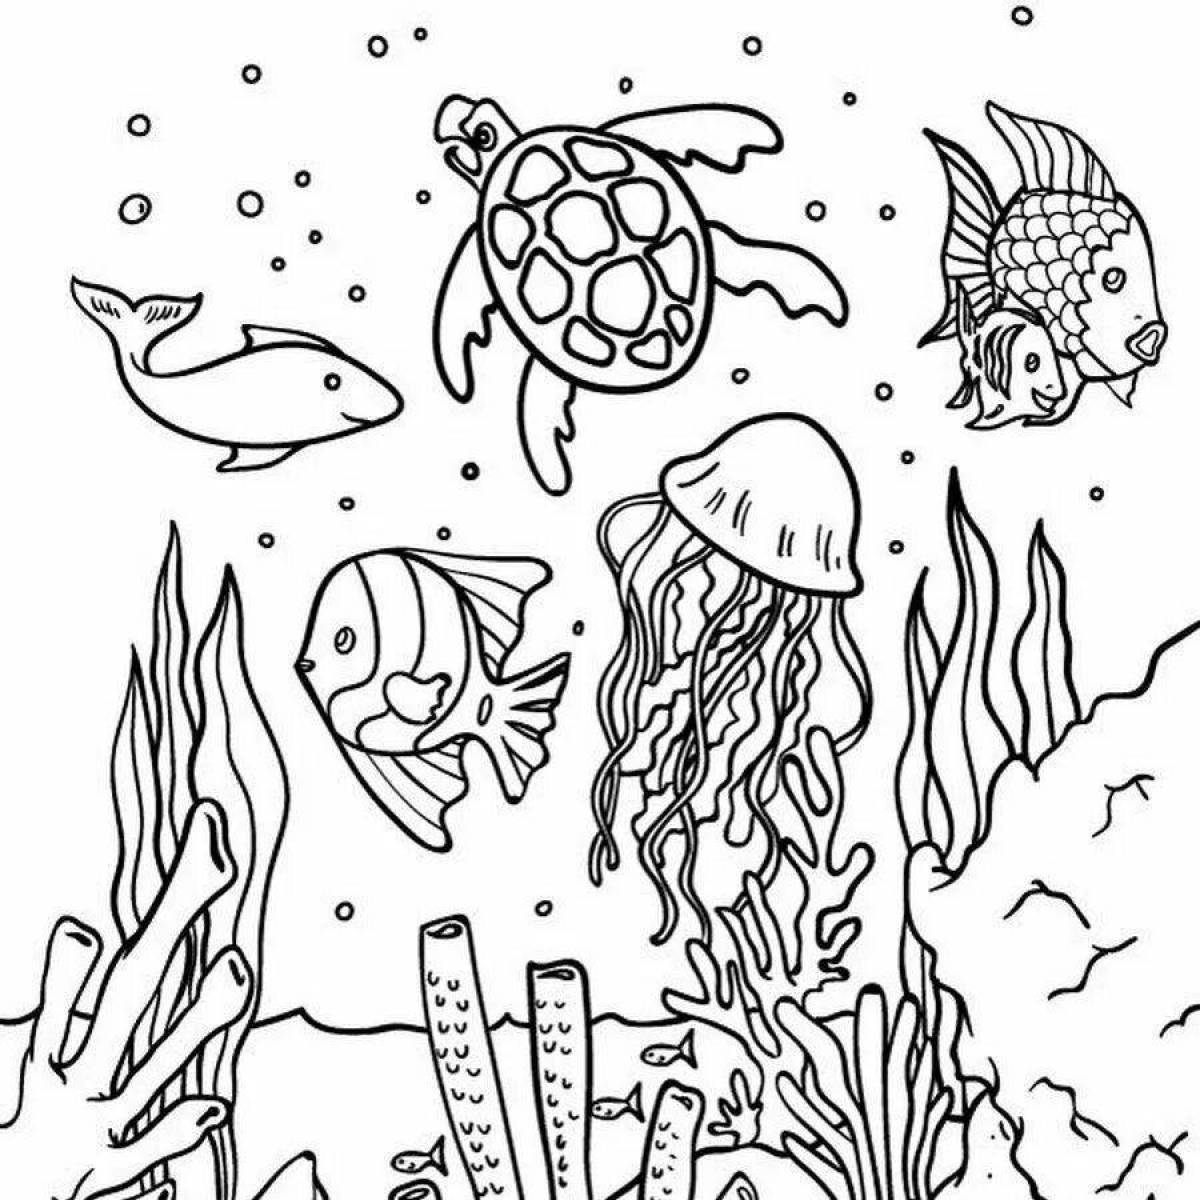 Coloring page charming underwater world